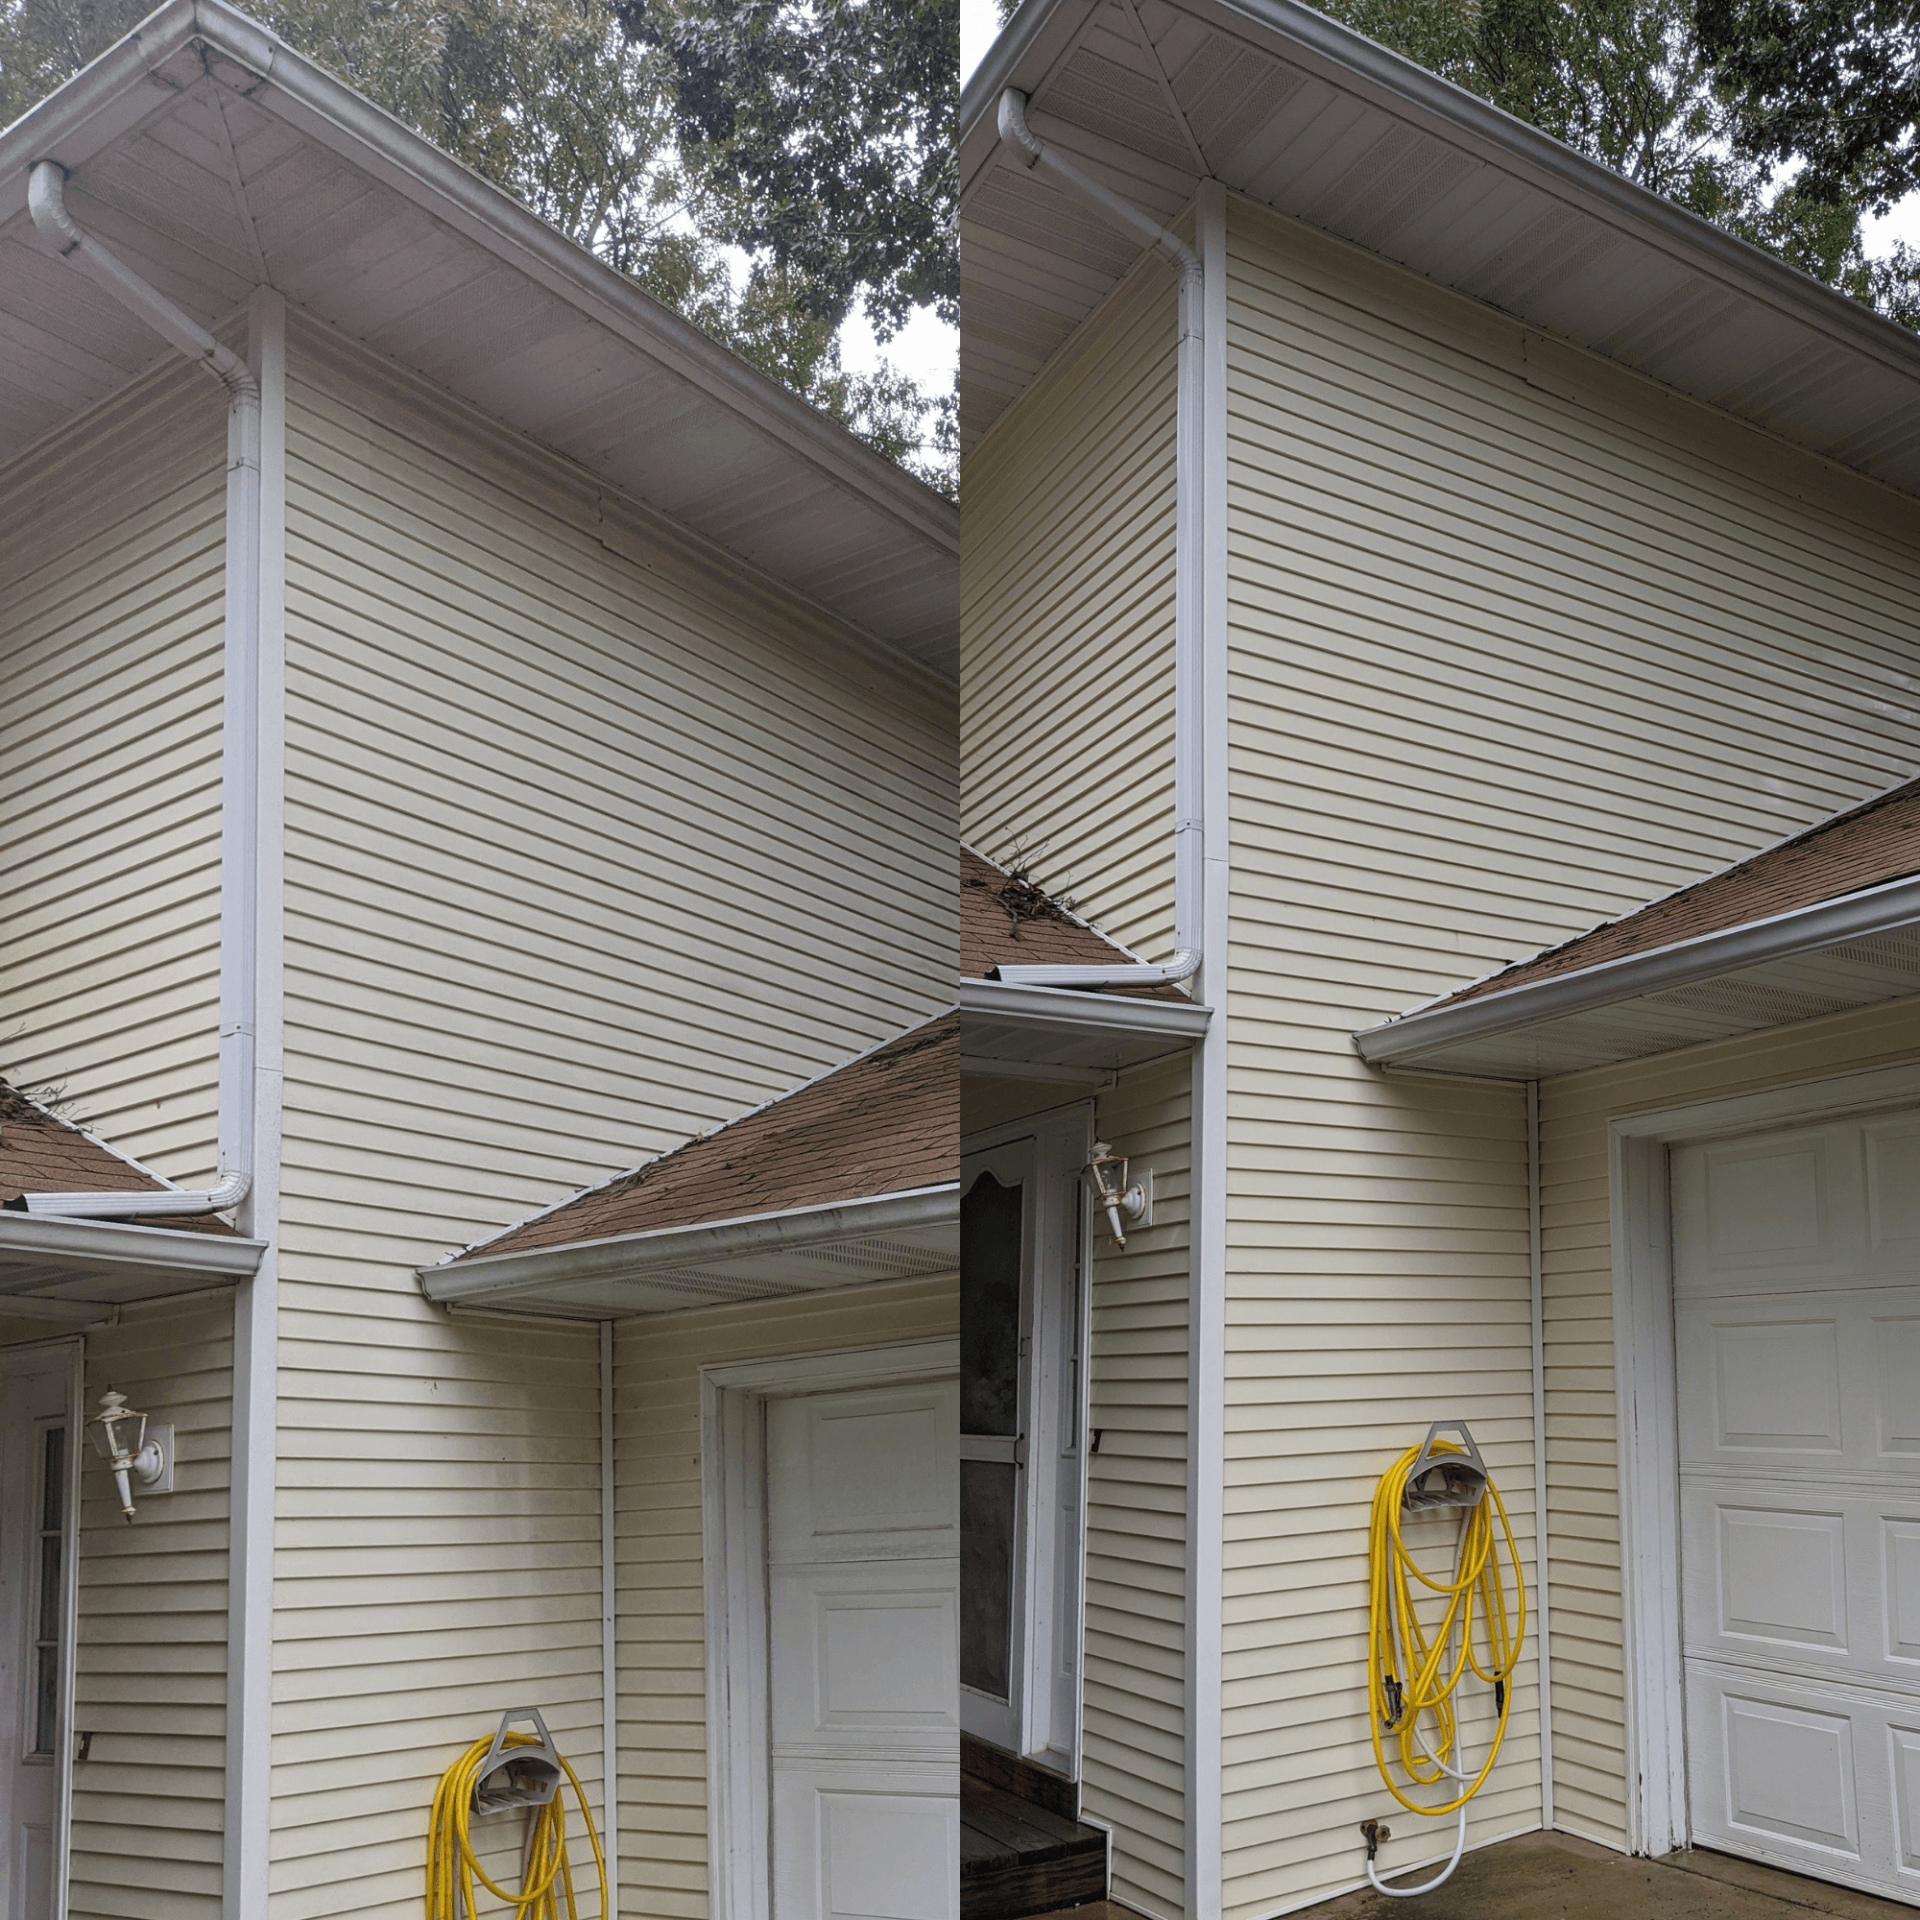 A before and after picture of a house with a garage door.